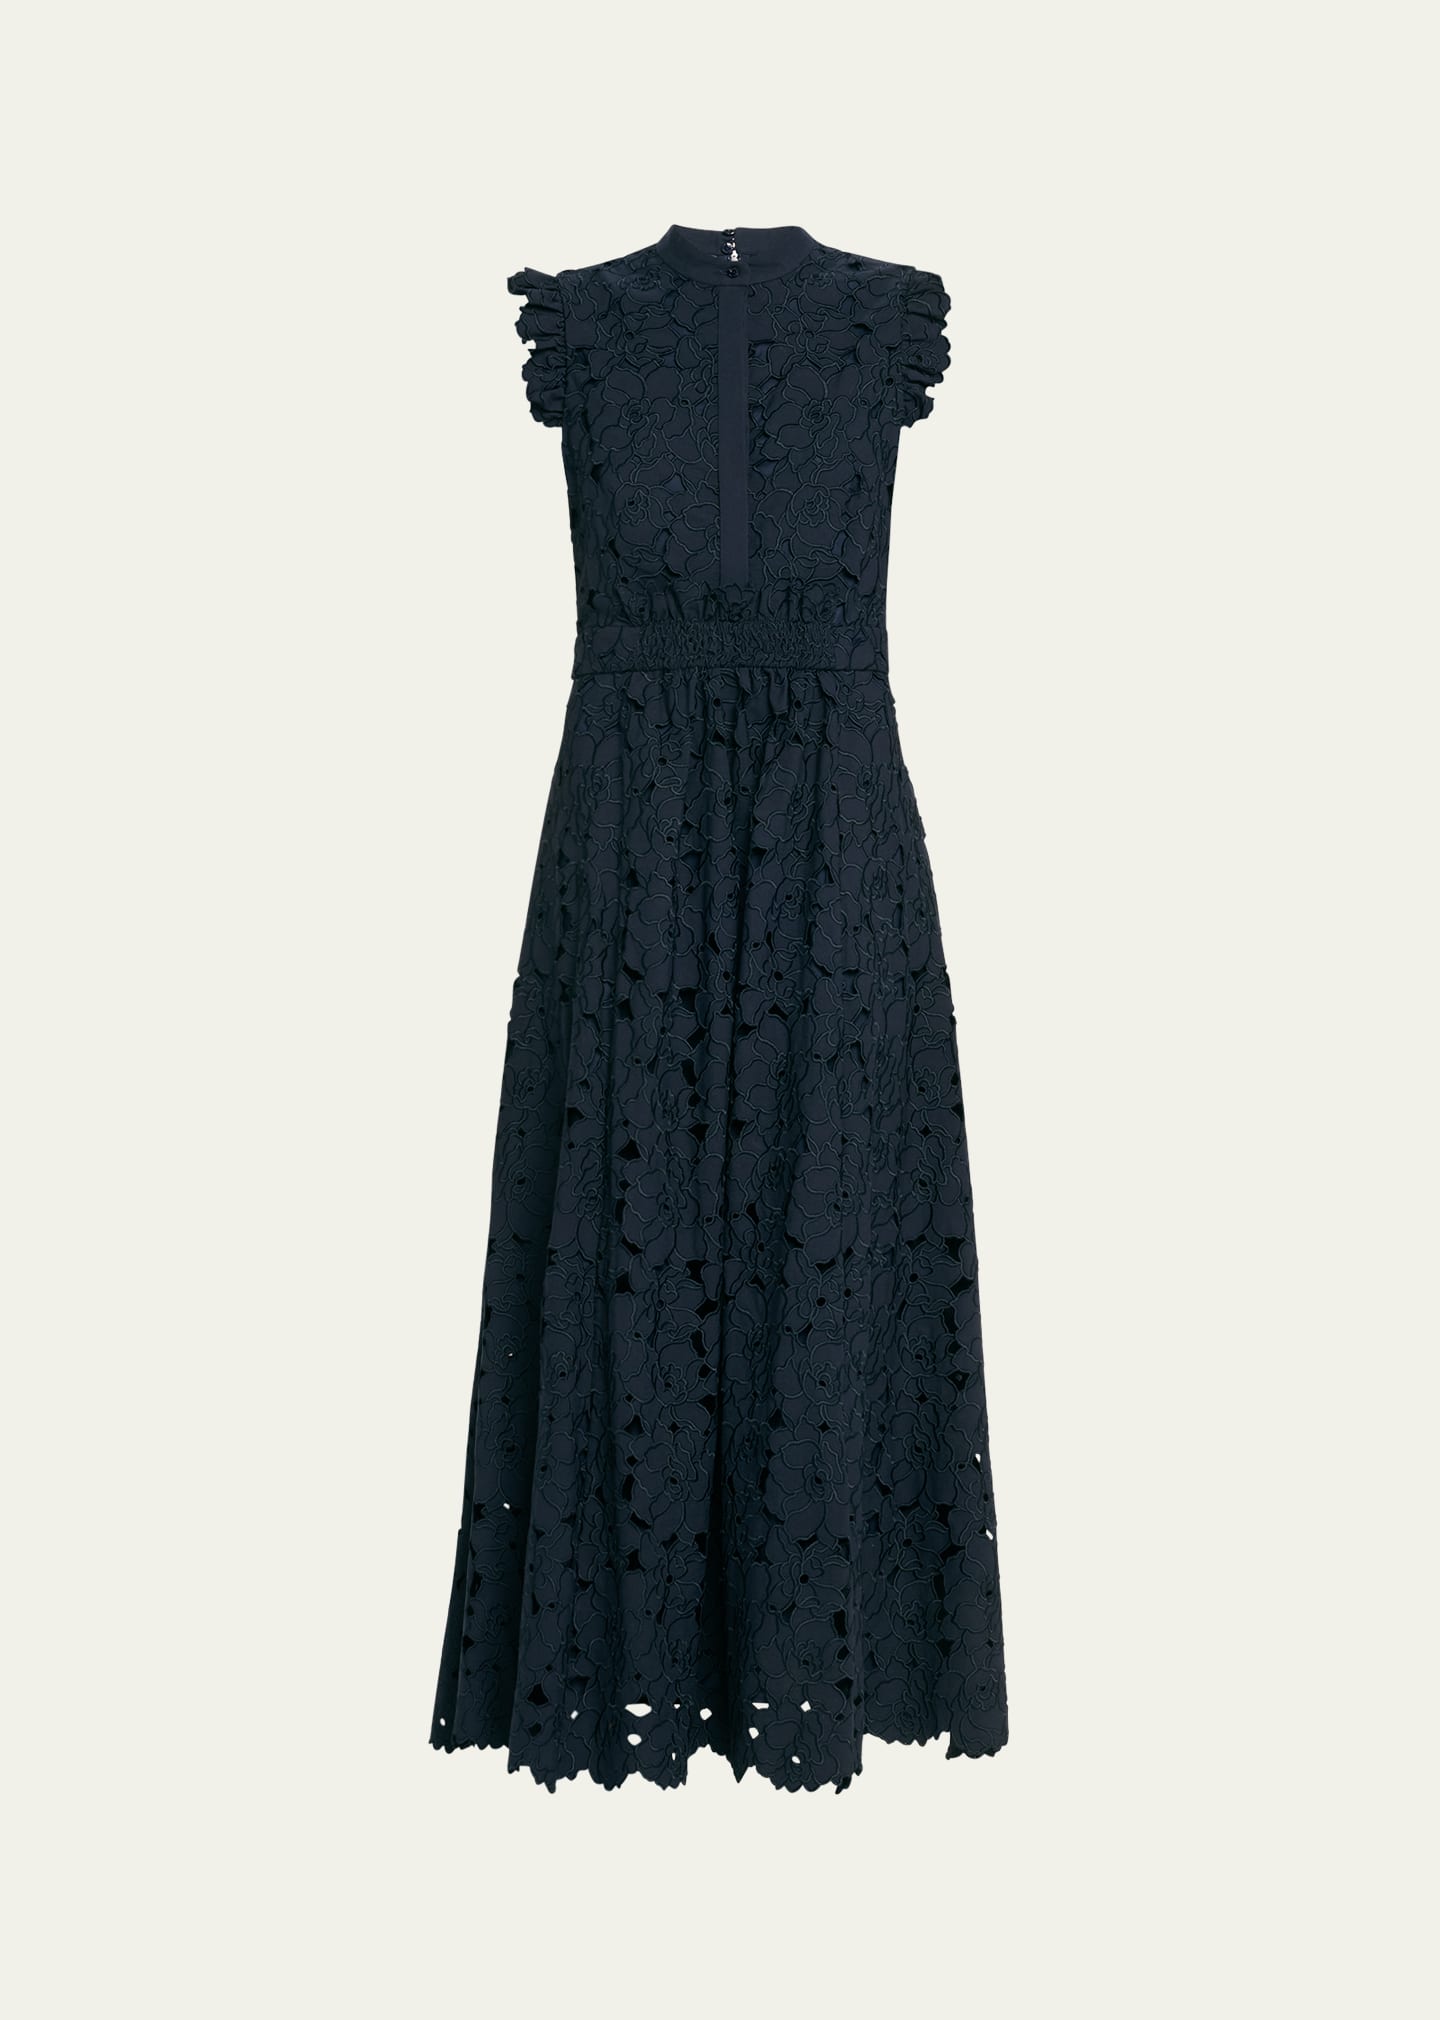 Erdem Scallop Gathered Guipure Lace Midi Dress In Navy